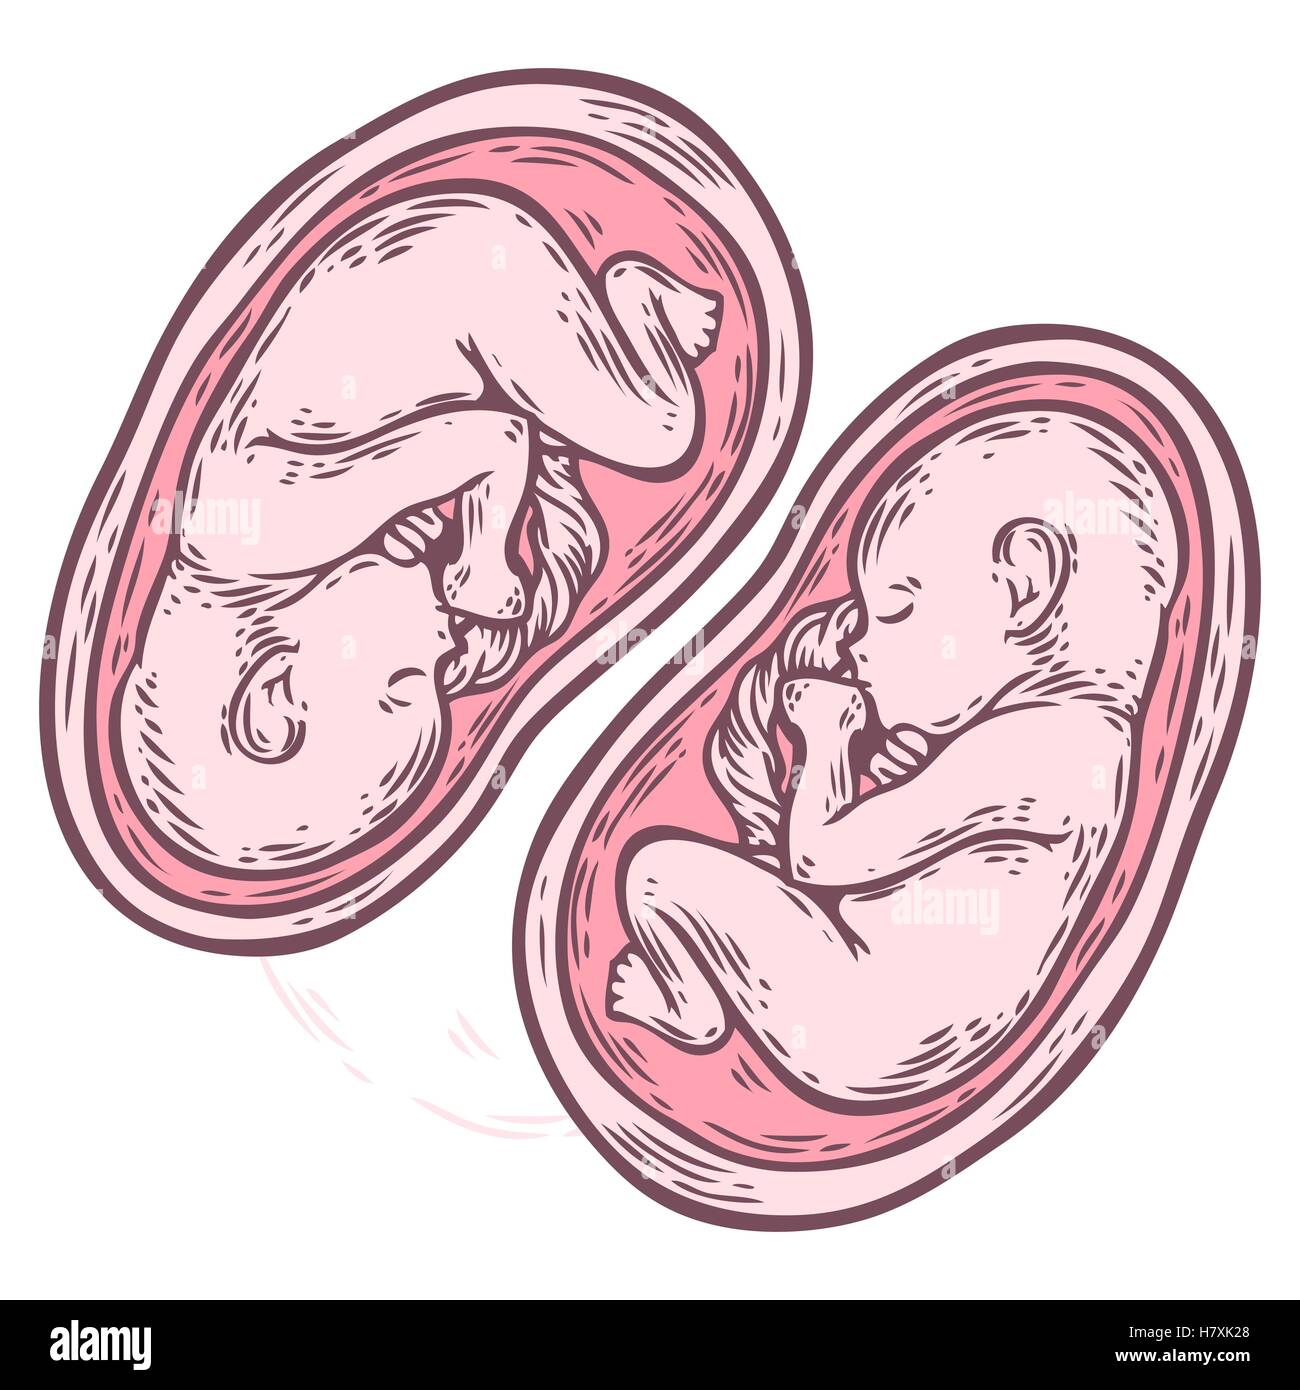 Human twins fetus concept hand drawn vector illustration prenatal growing baby, umbilicle cord isolated on a white background as Stock Vector